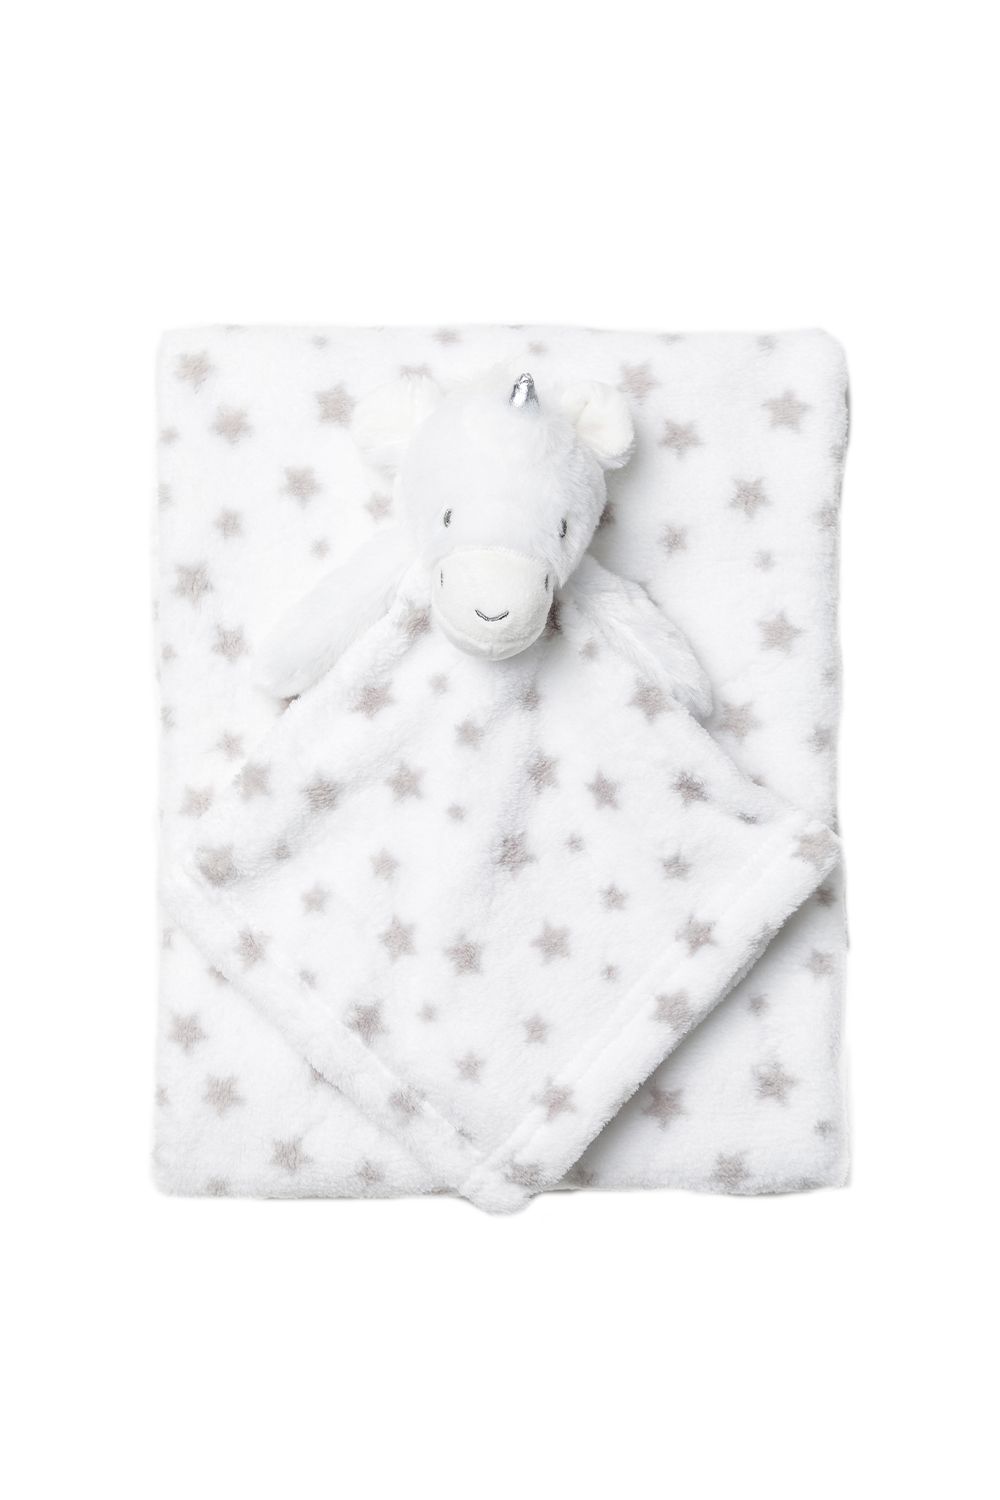 This adorable Snuggle Tots comforter and blanket set make the perfect gift for the little one in your life. The two-piece set features a beautiful, fluffy blanket with a grey star print all over, and a comforter with the same print with a cuddly unicorn toy attached. This set makes a lovely baby shower present.